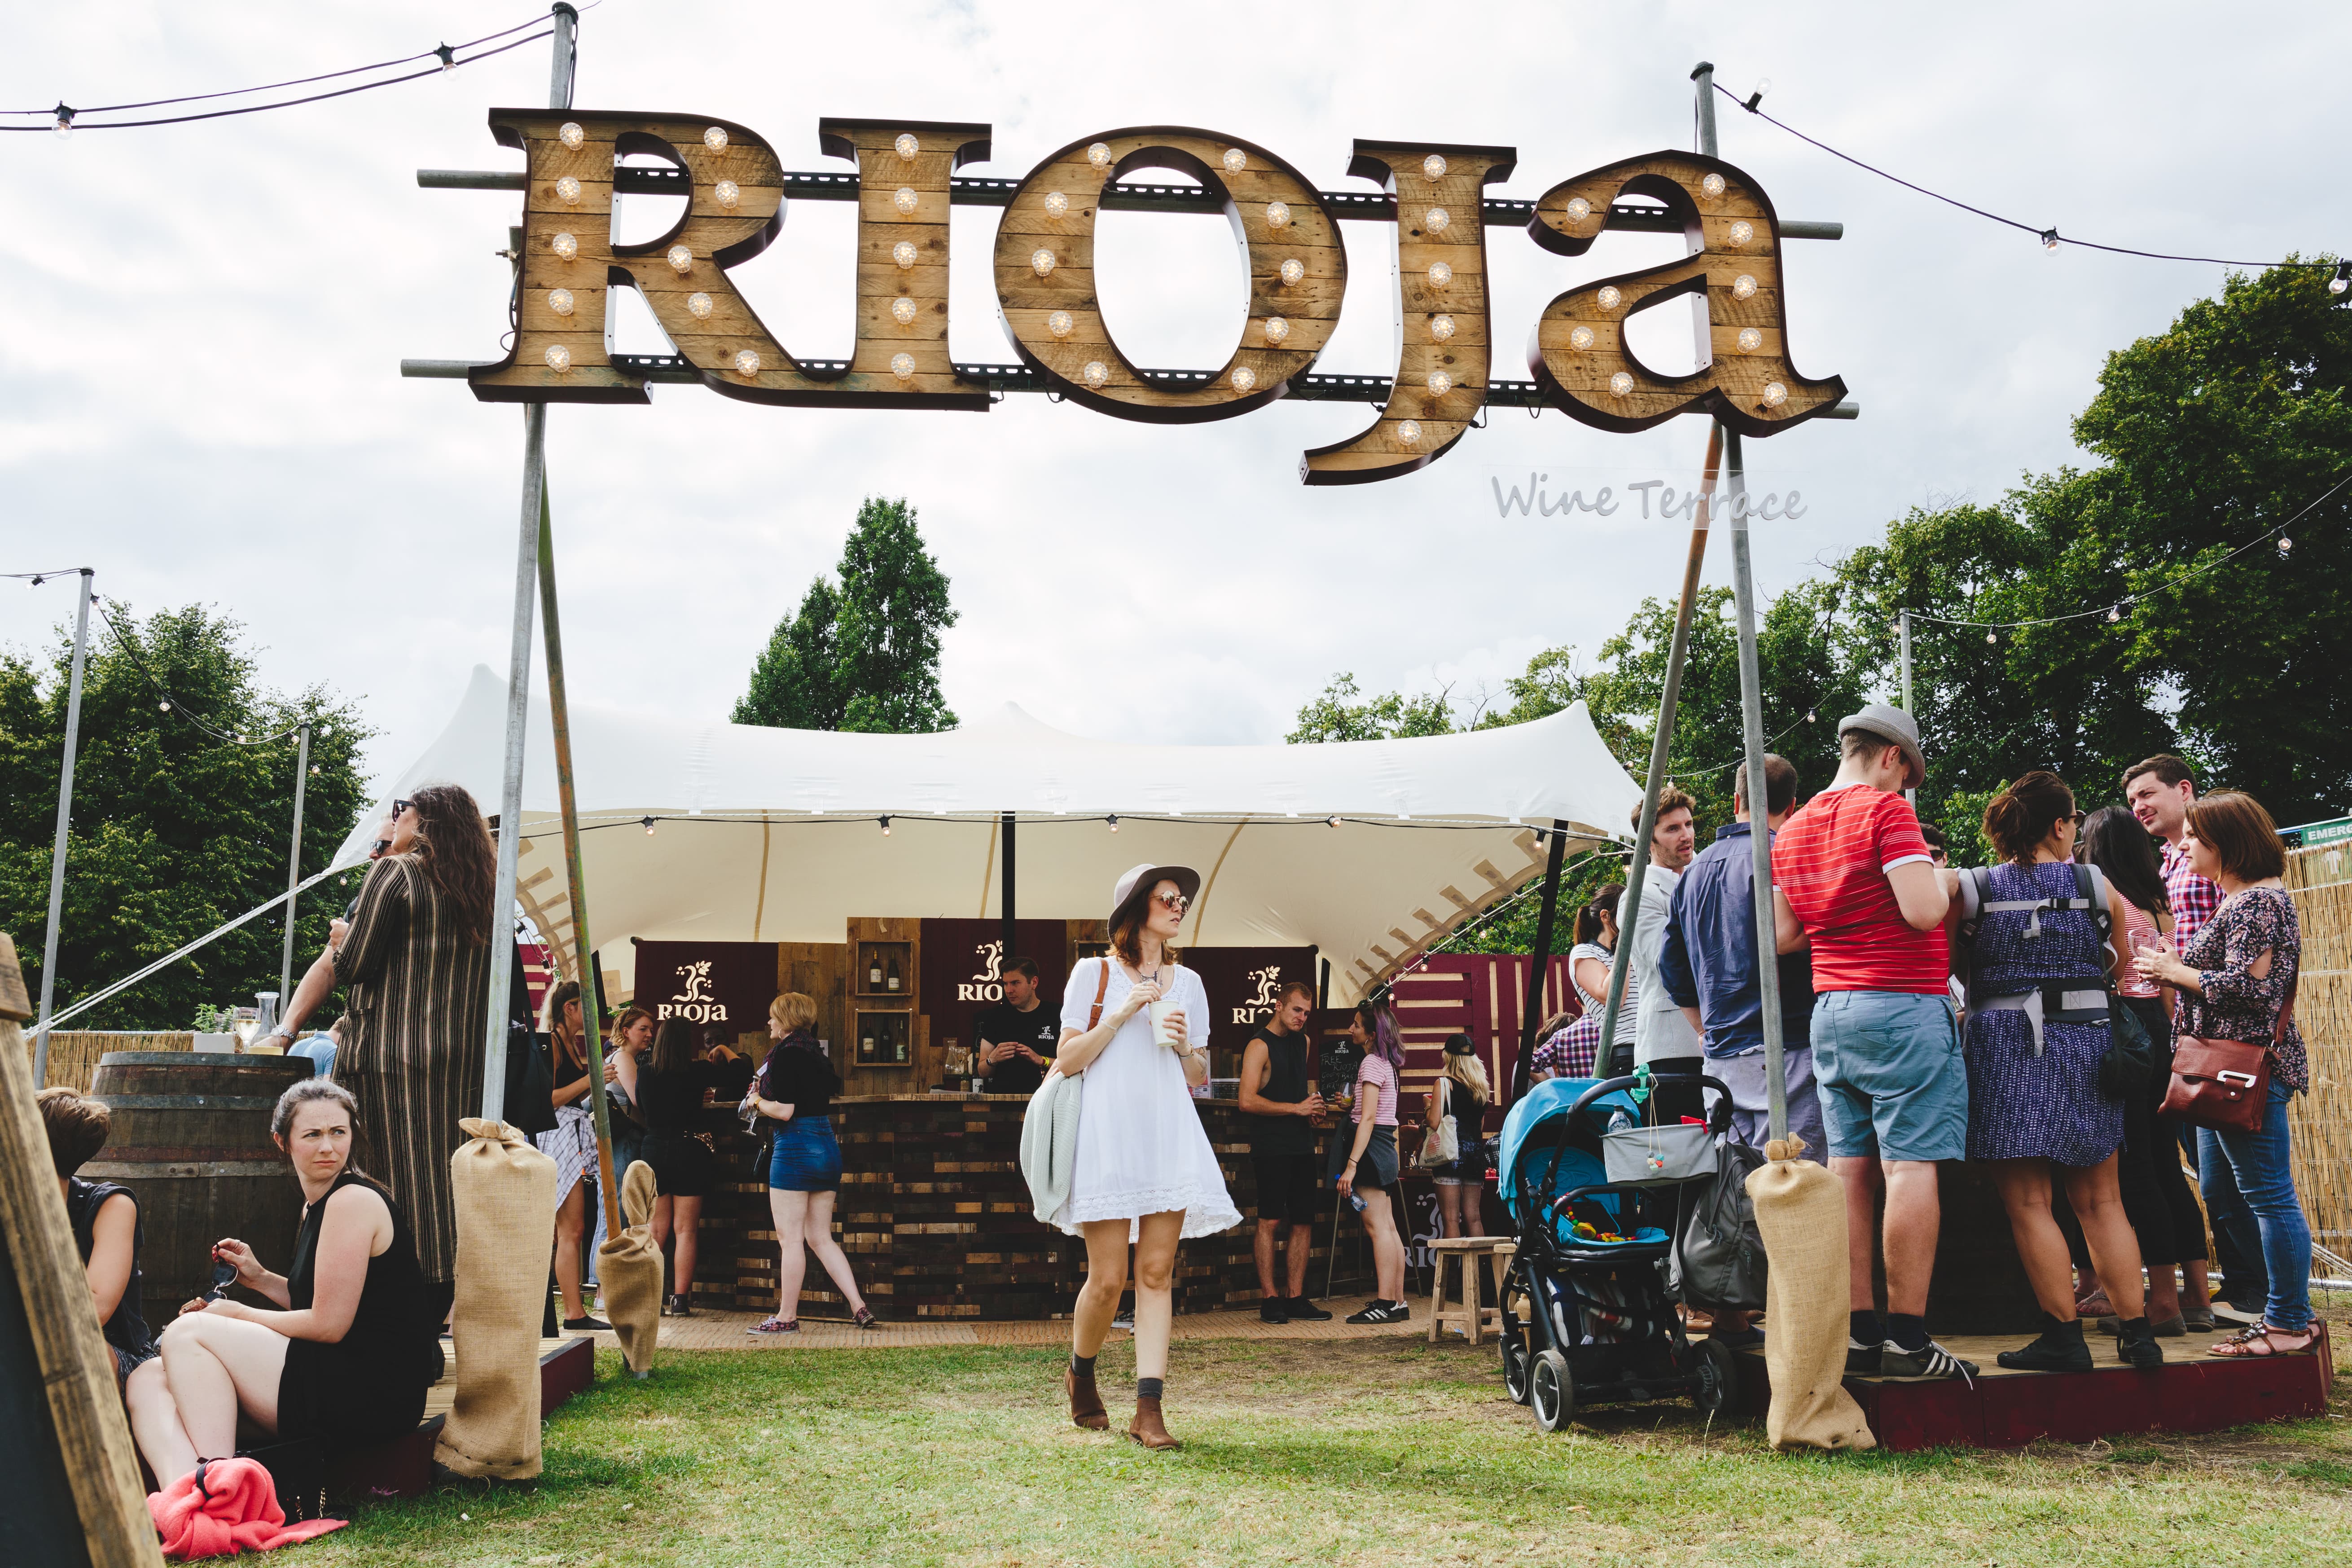 Rioja wines return to London music festivals for the second year running